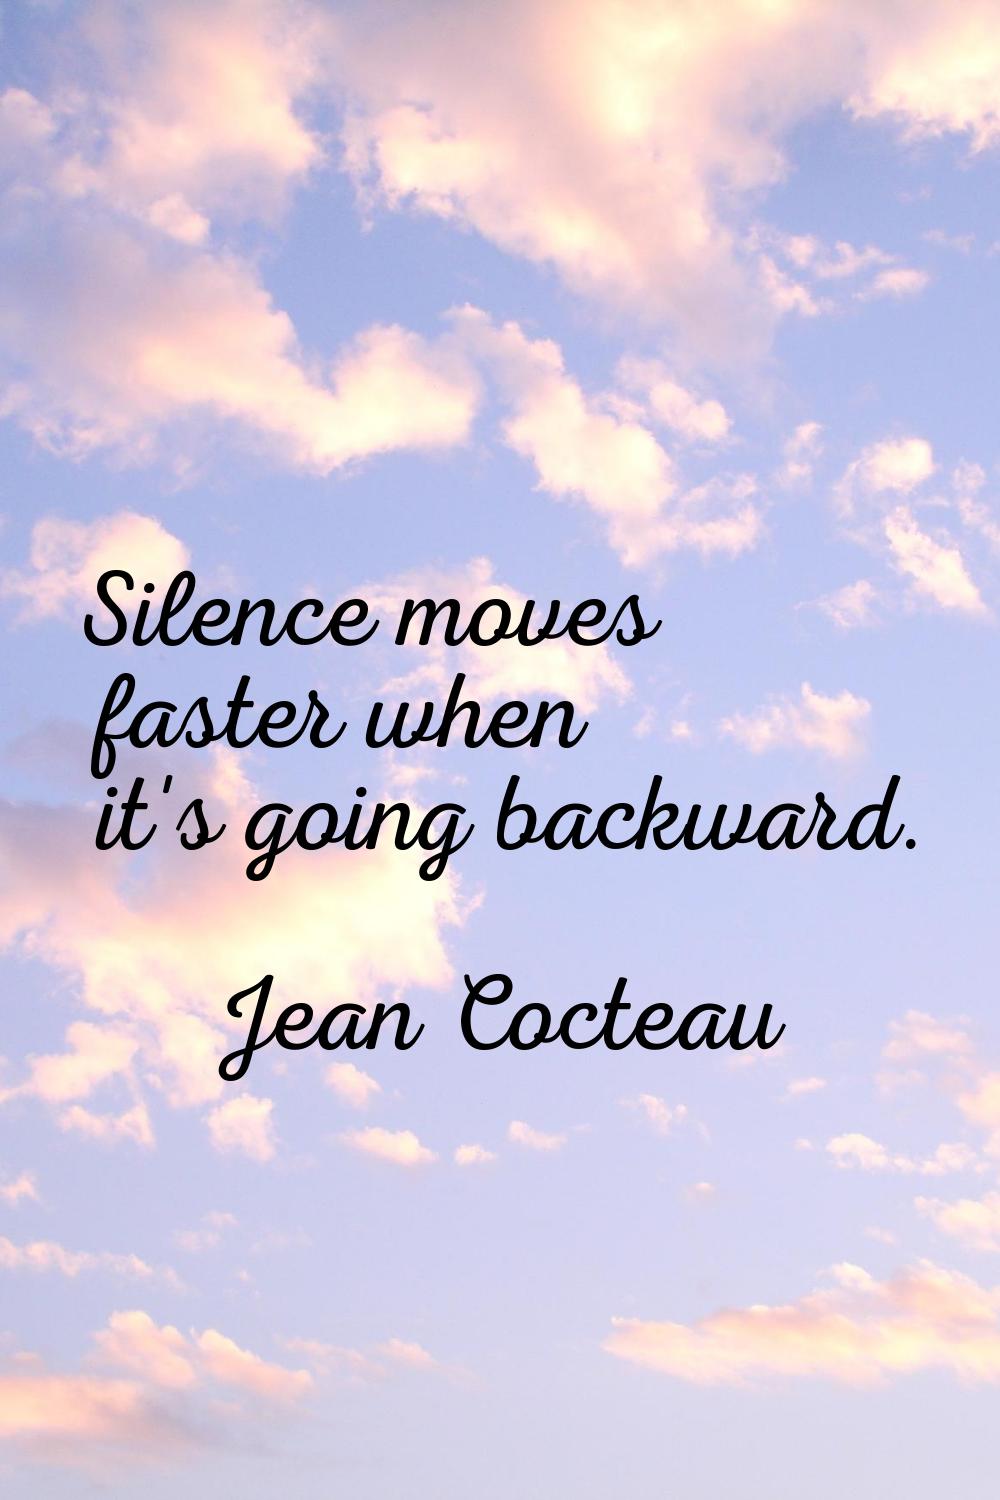 Silence moves faster when it's going backward.